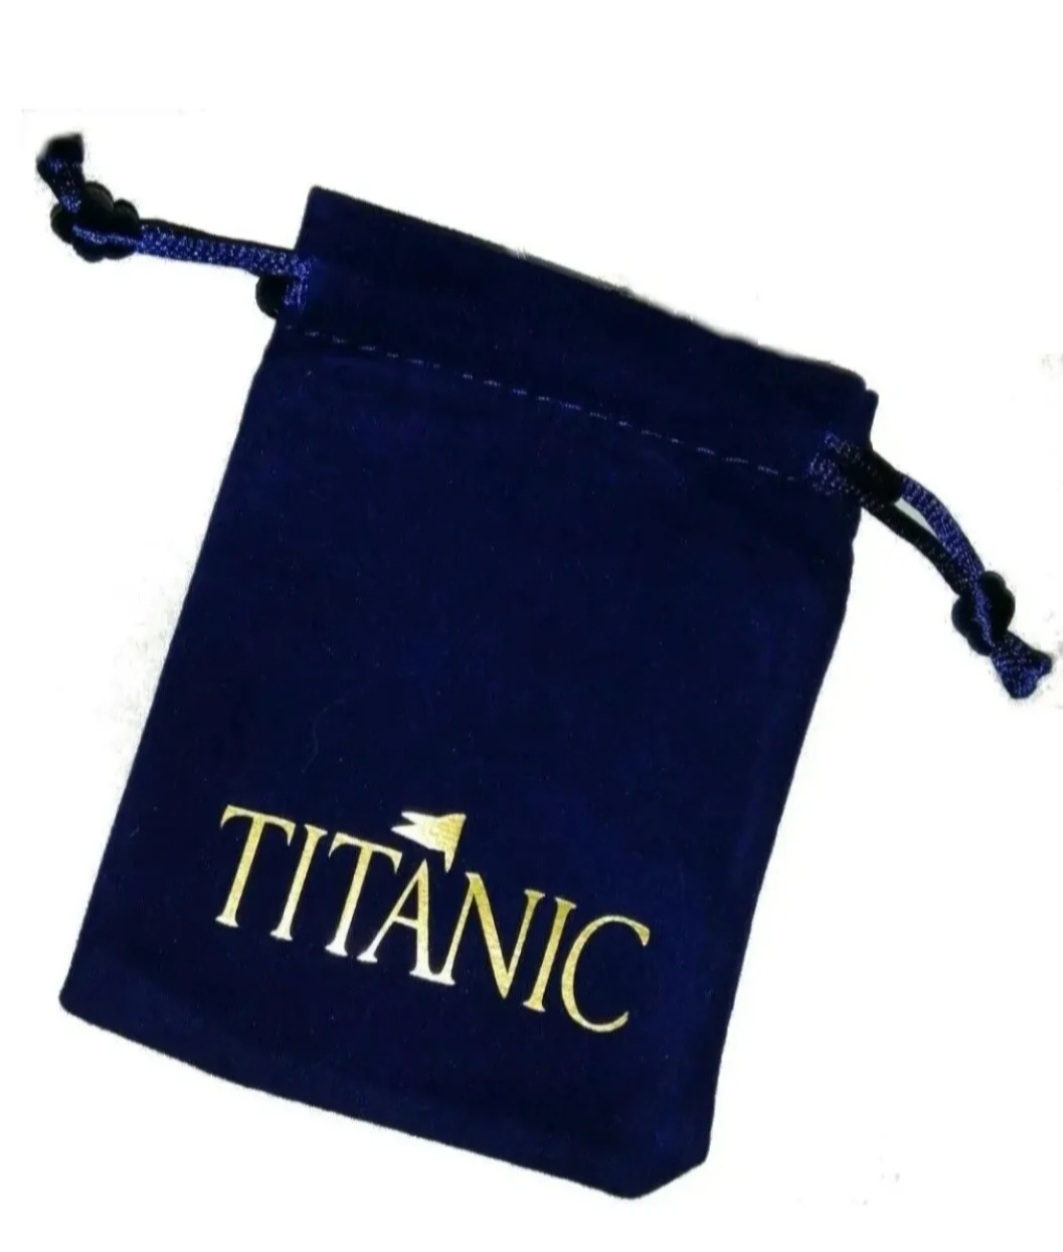 Titanic Heart of The Ocean Pendant Necklace and Velvet Pouch - Image 3 of 3